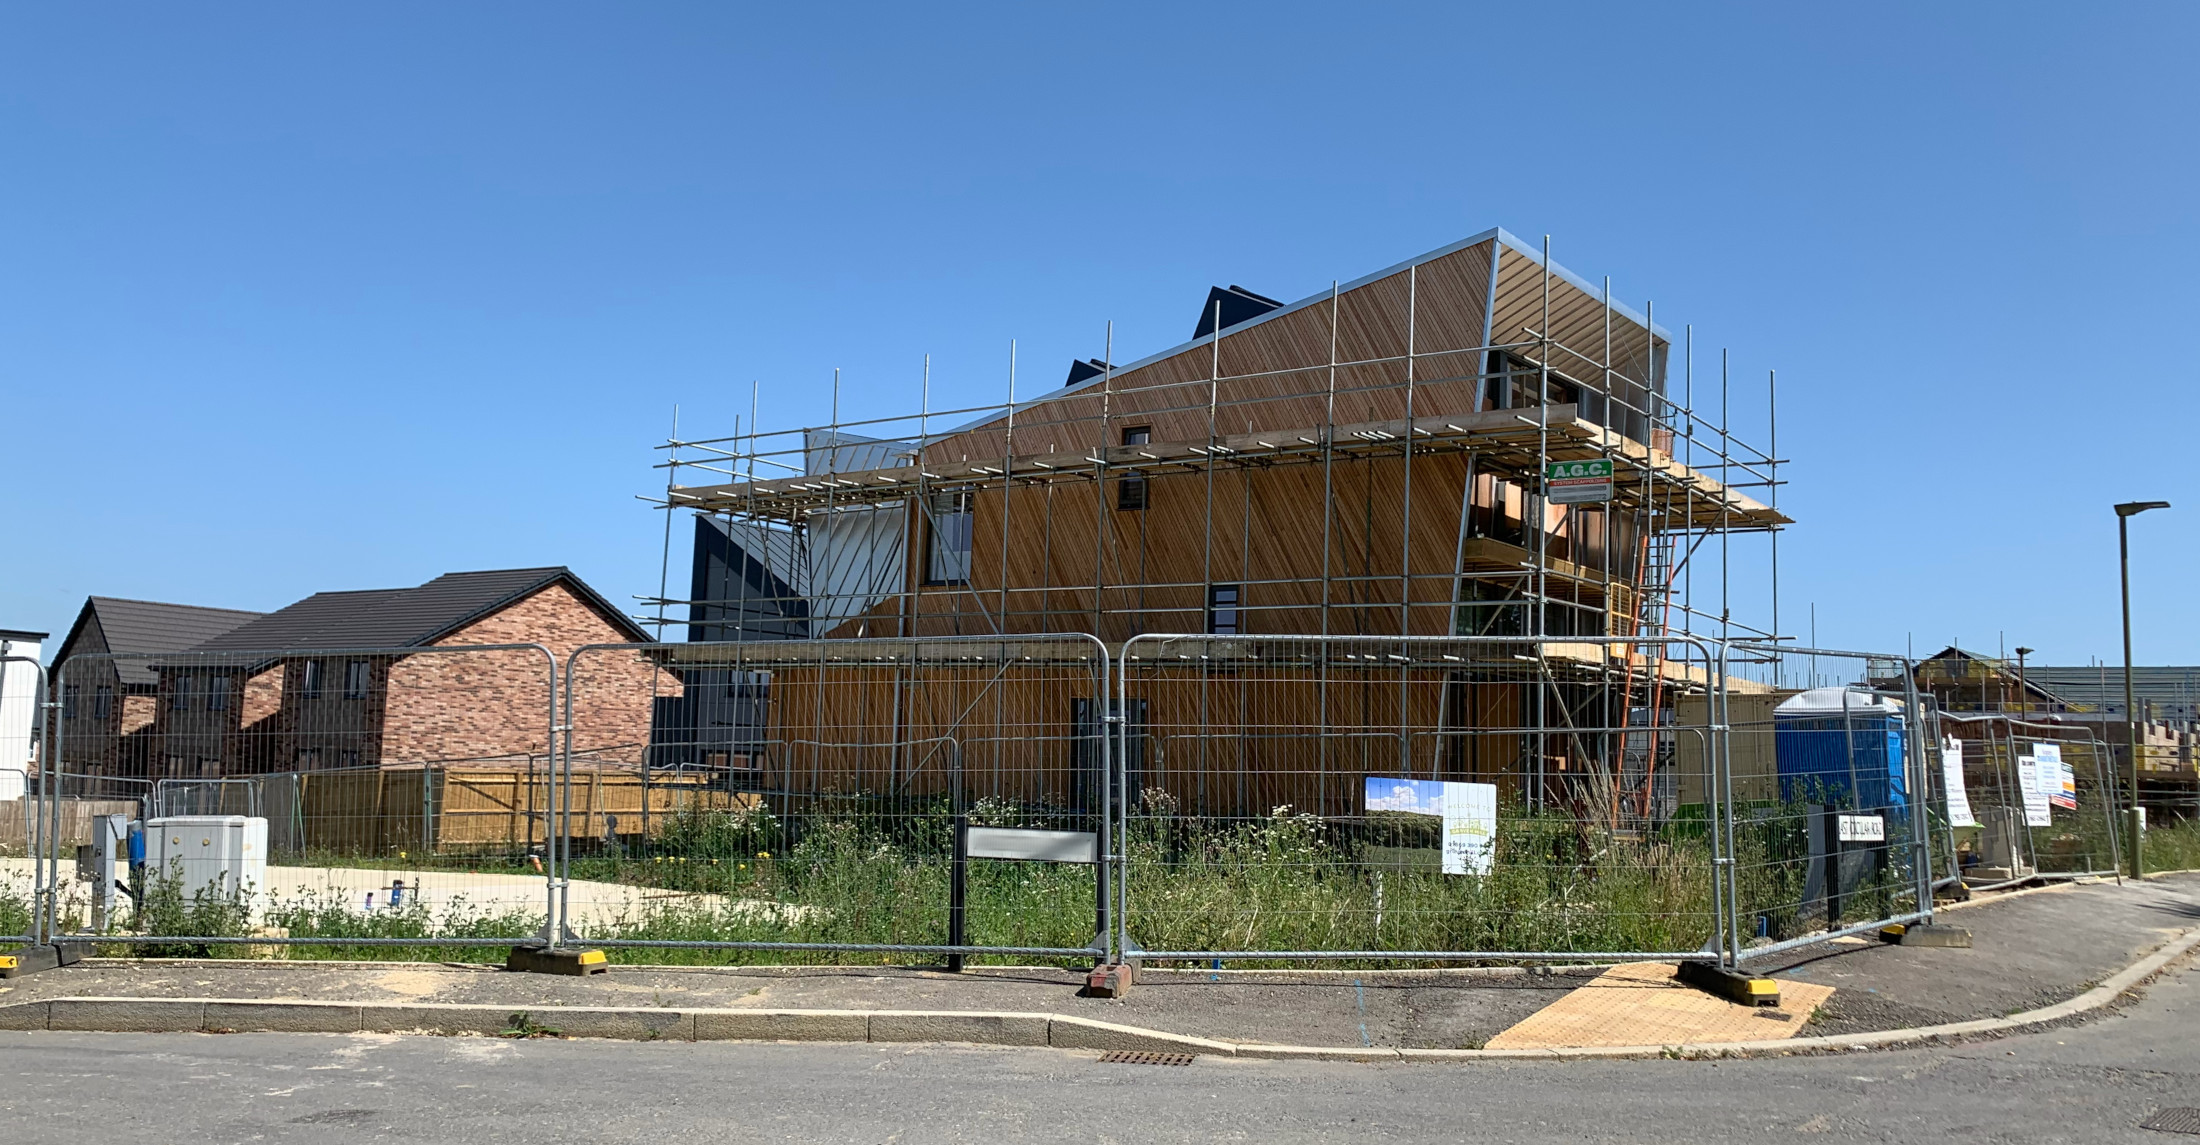 ‘Help to Build’ Opens, Together with Wider Support for Self Build